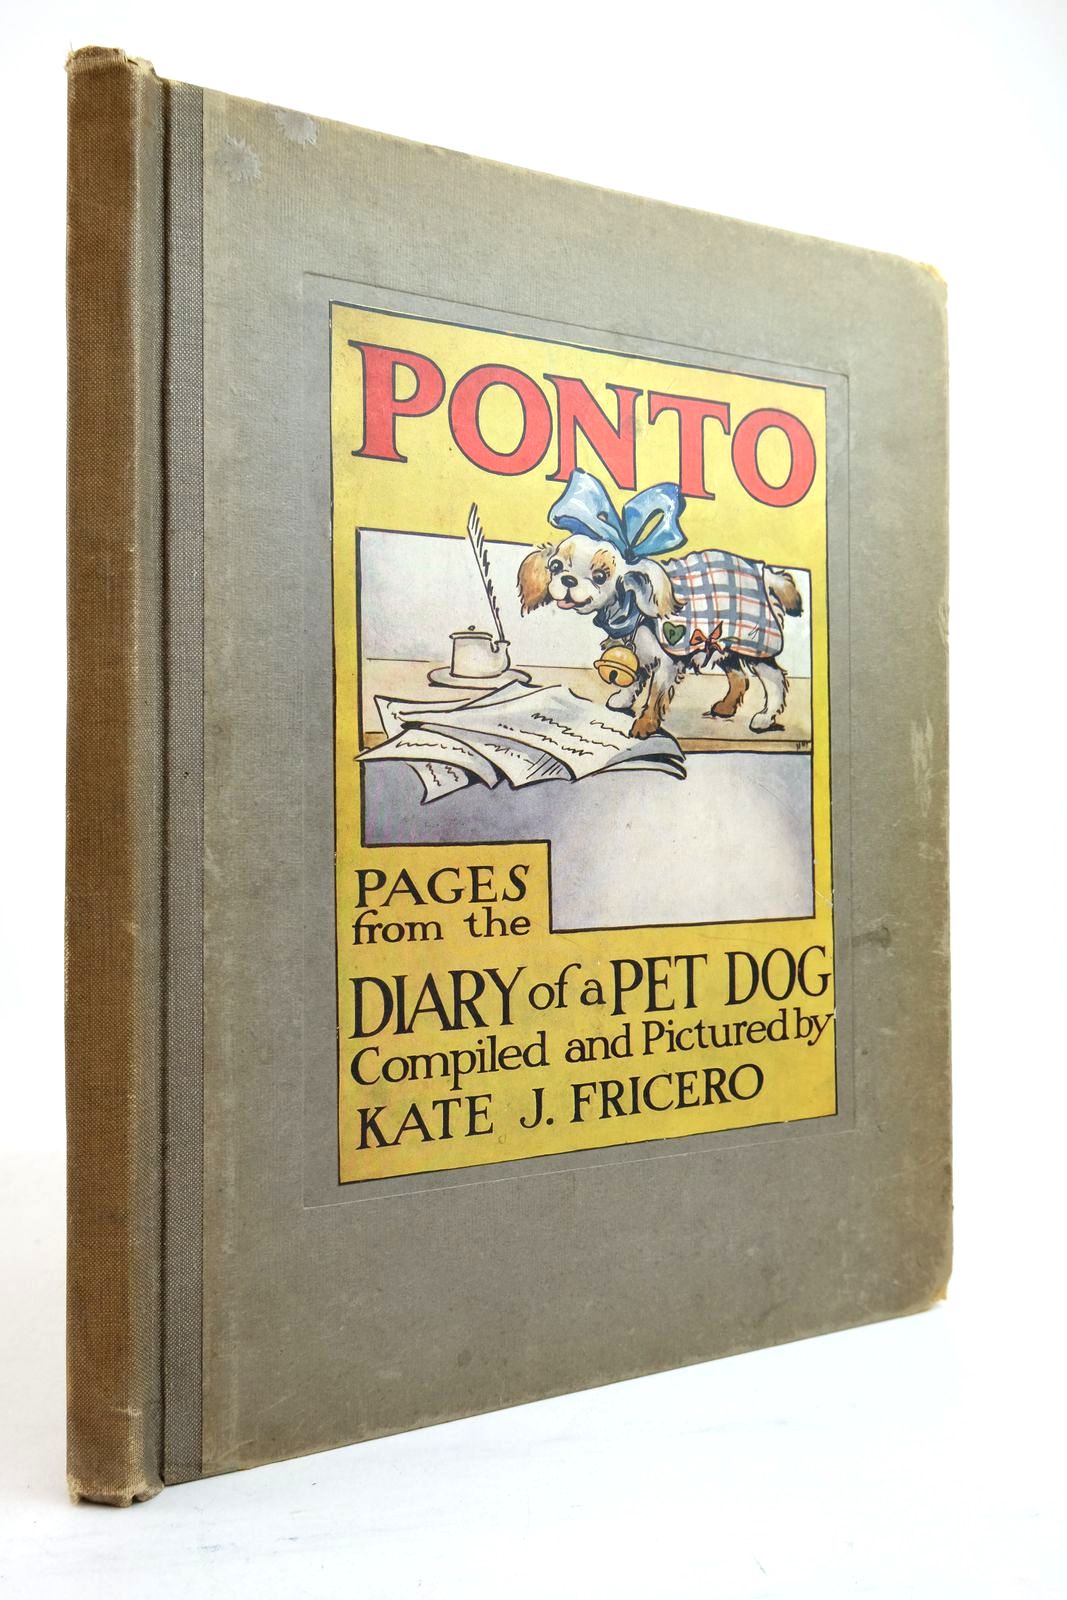 Photo of PONTO PAGES FROM THE DIARY OF A PET DOG written by Fricero, Kate J. illustrated by Fricero, Kate J. published by Blackie &amp; Son Ltd. (STOCK CODE: 2134713)  for sale by Stella & Rose's Books